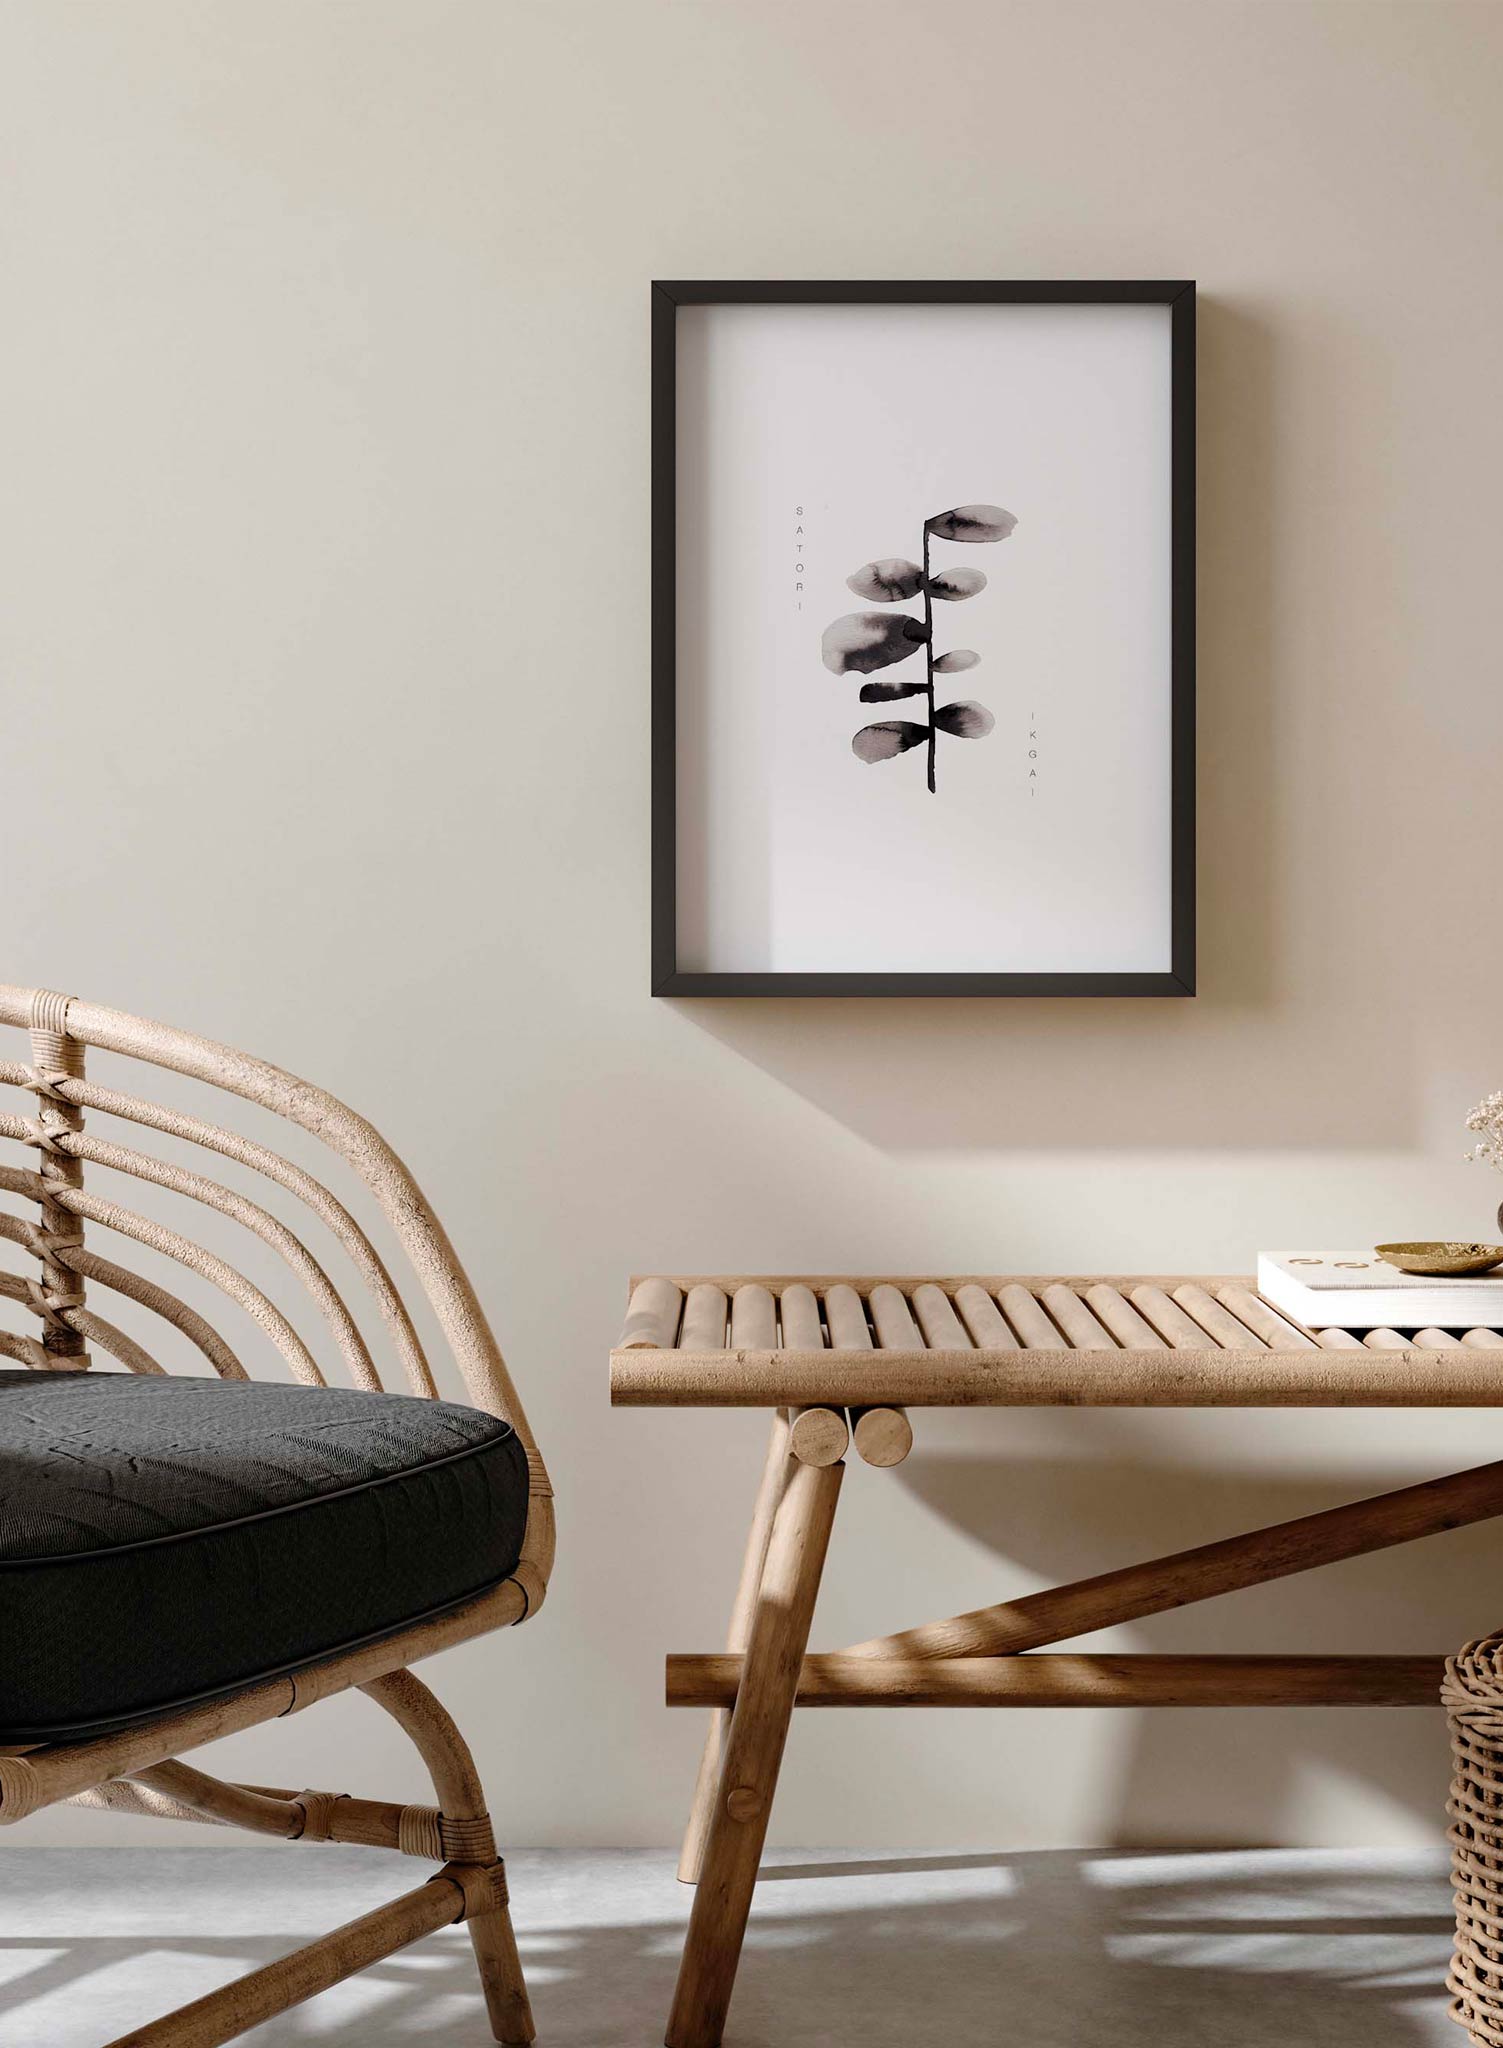 Satori is a minimalist illustration by Opposite Wall of a branch with eight leaves drawn in ink.